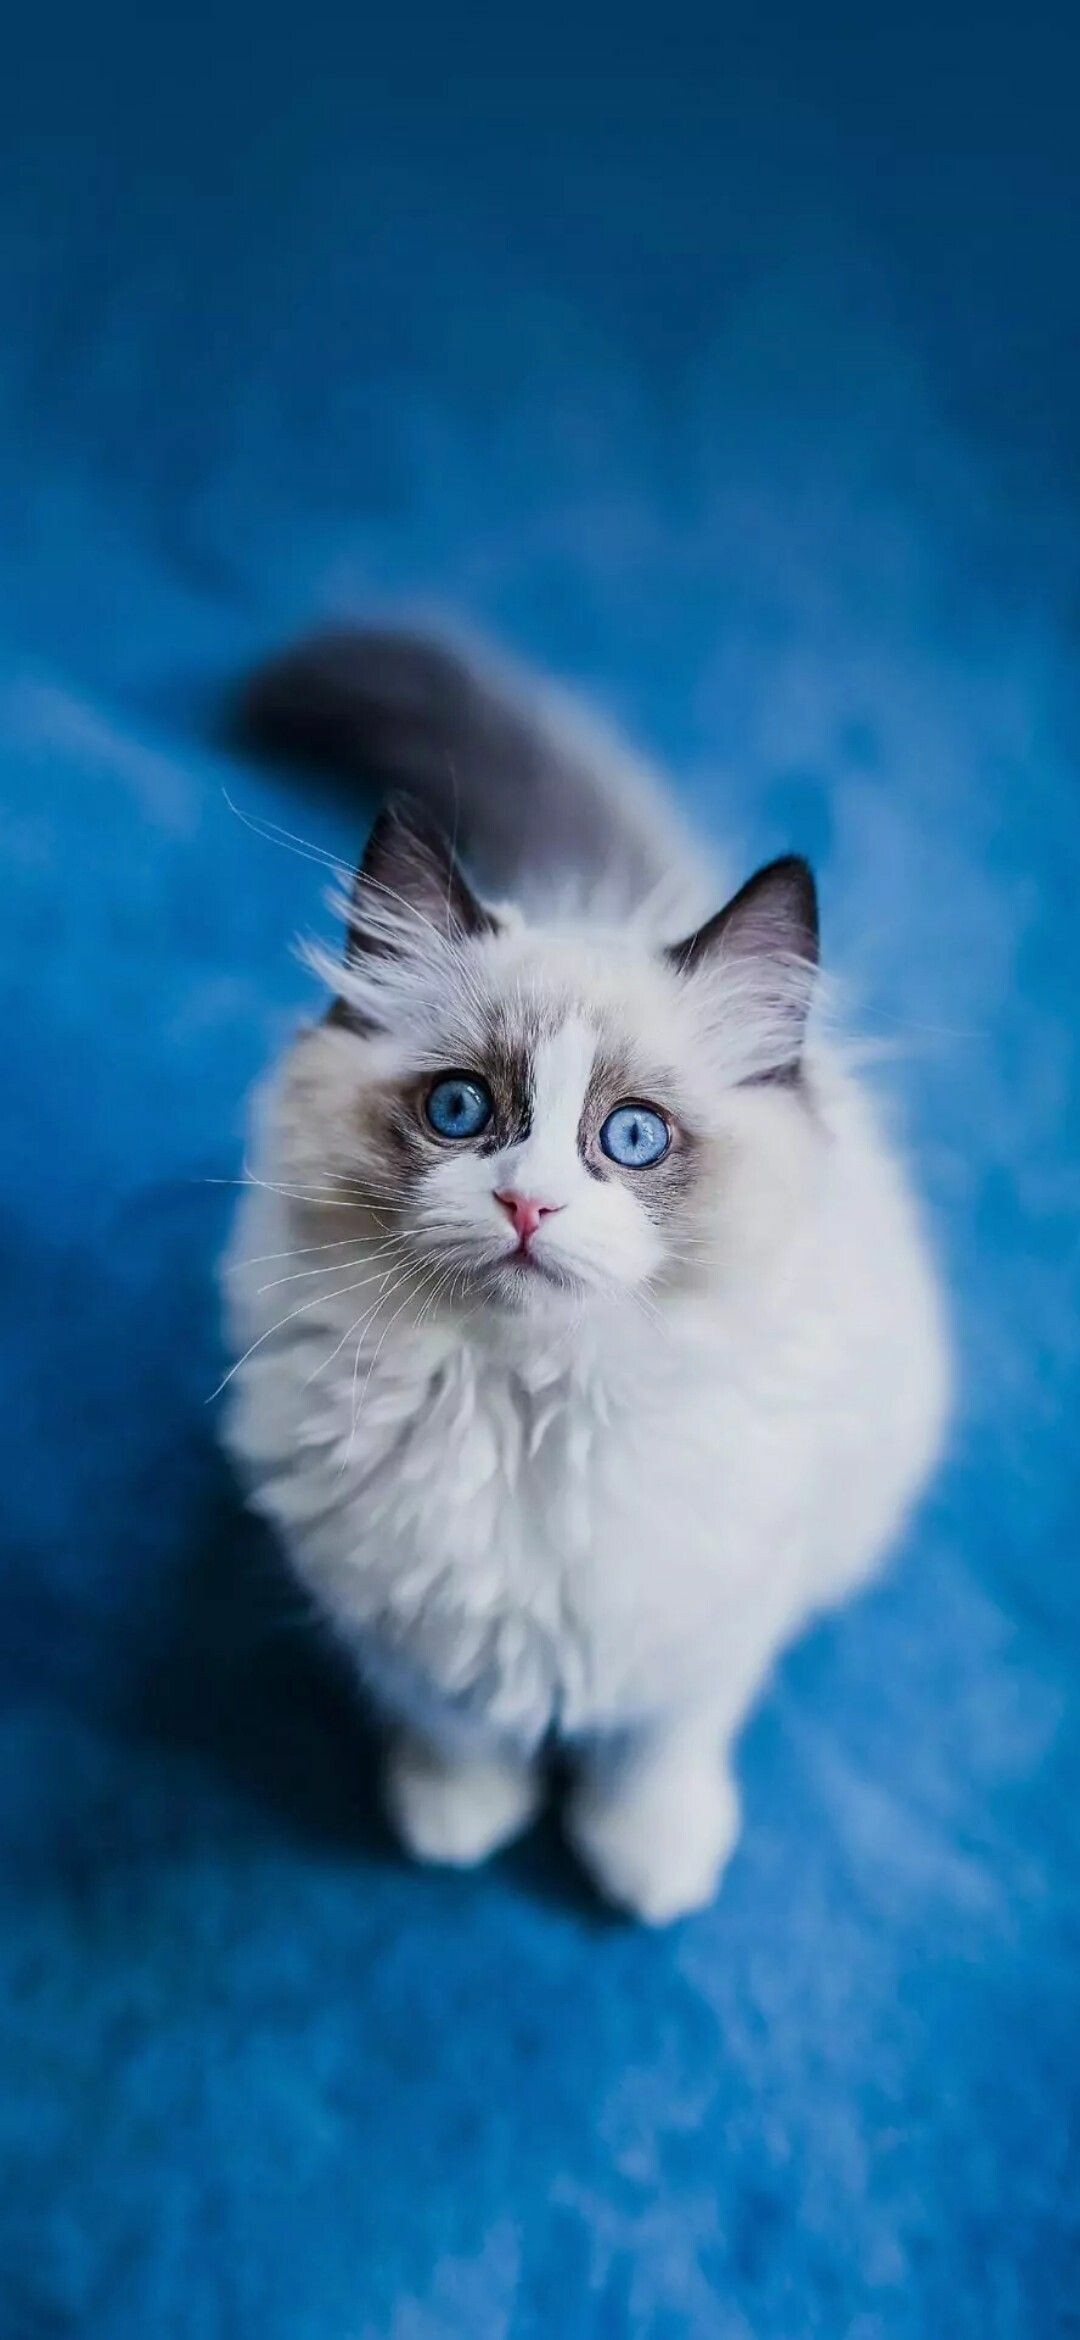 Ragdoll: An affectionate and intelligent cat, giving the impression of graceful movement and subdued power, striking in appearance. 1080x2340 HD Wallpaper.